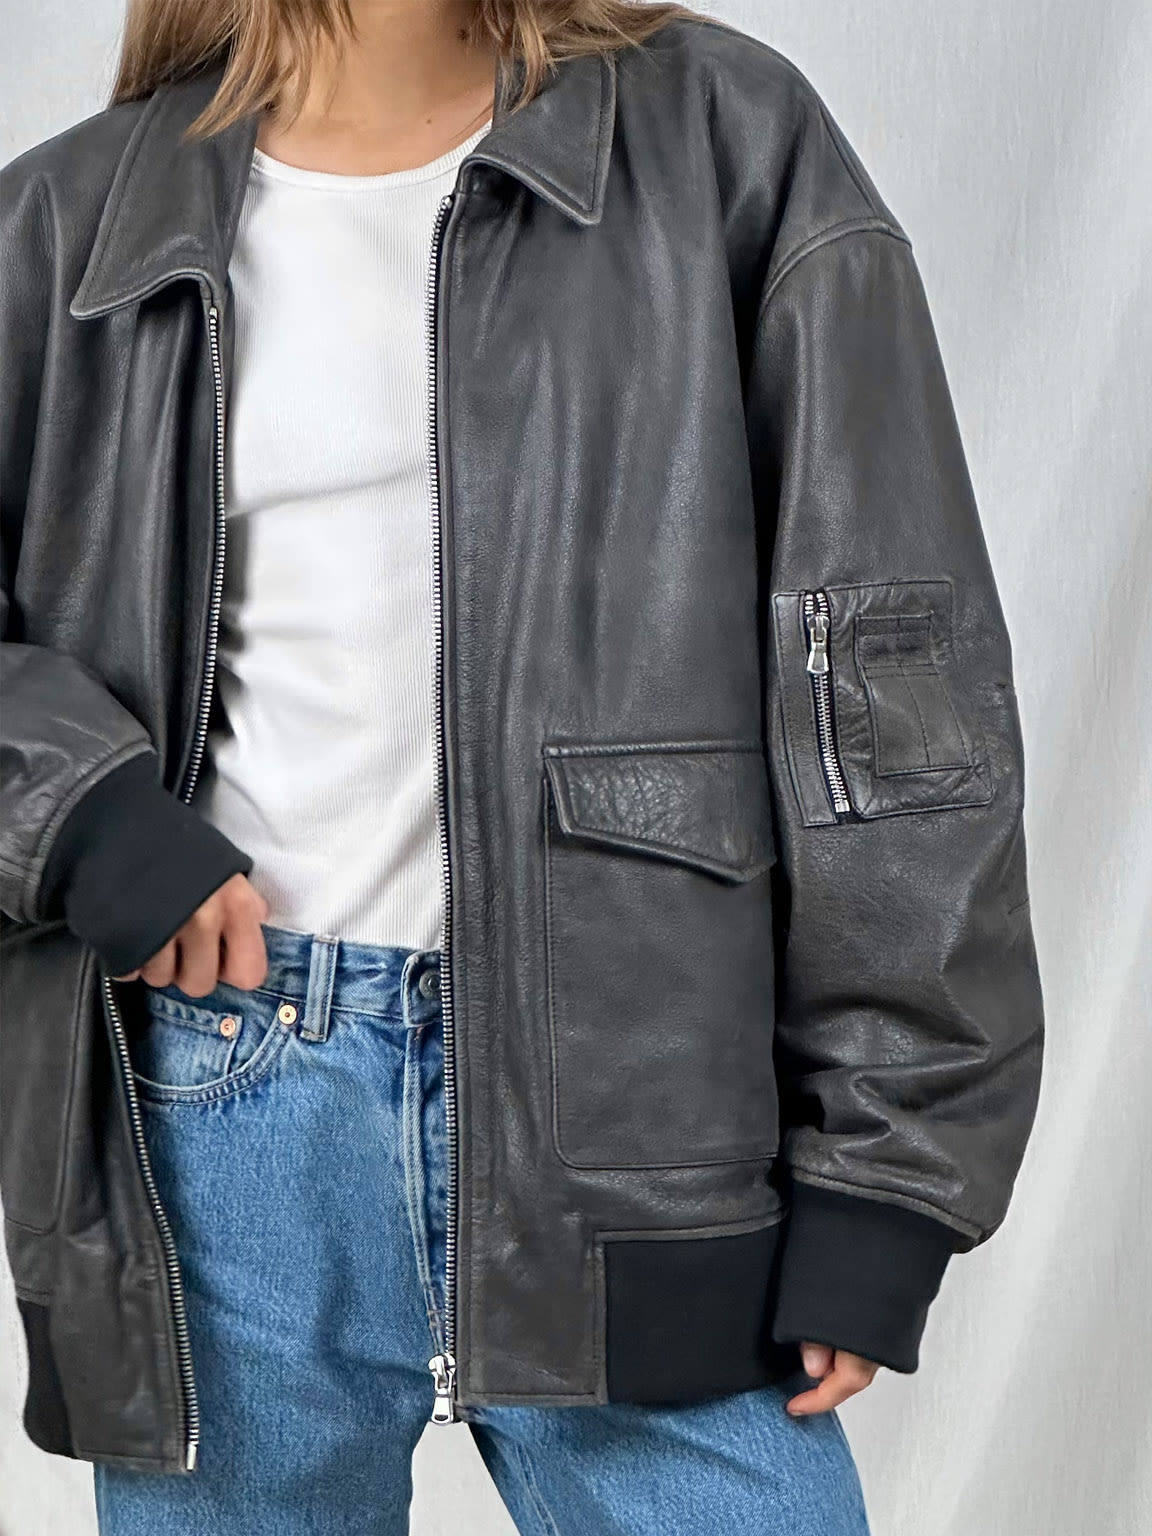 CLYDE LEATHER BOMBER - BLACK